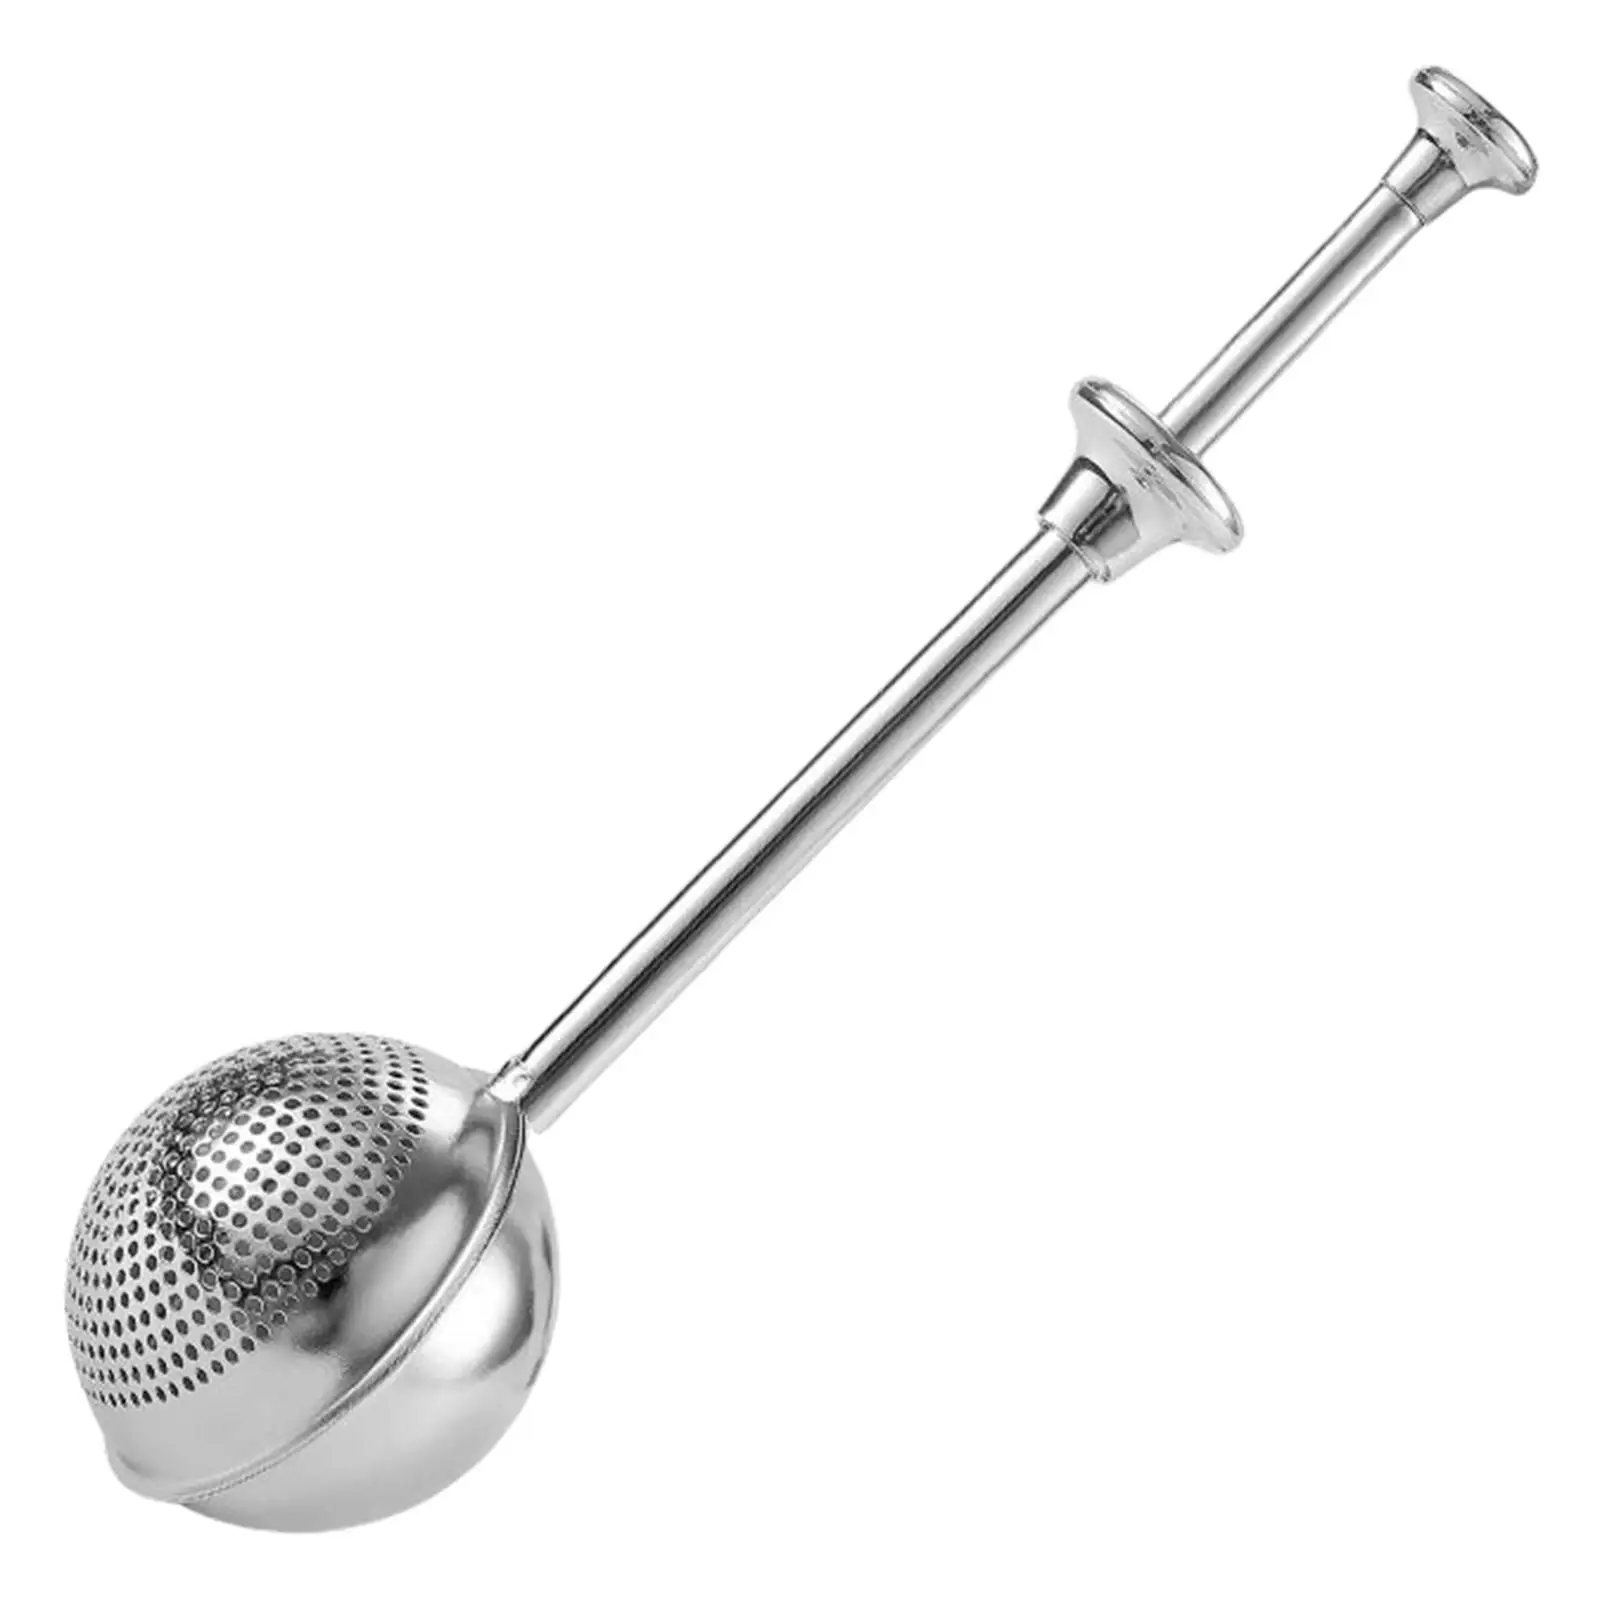 Stainless Steel Powder Shaker Telescopic Flour Sieve for Coffee Cocoa Powder Pepper Spice